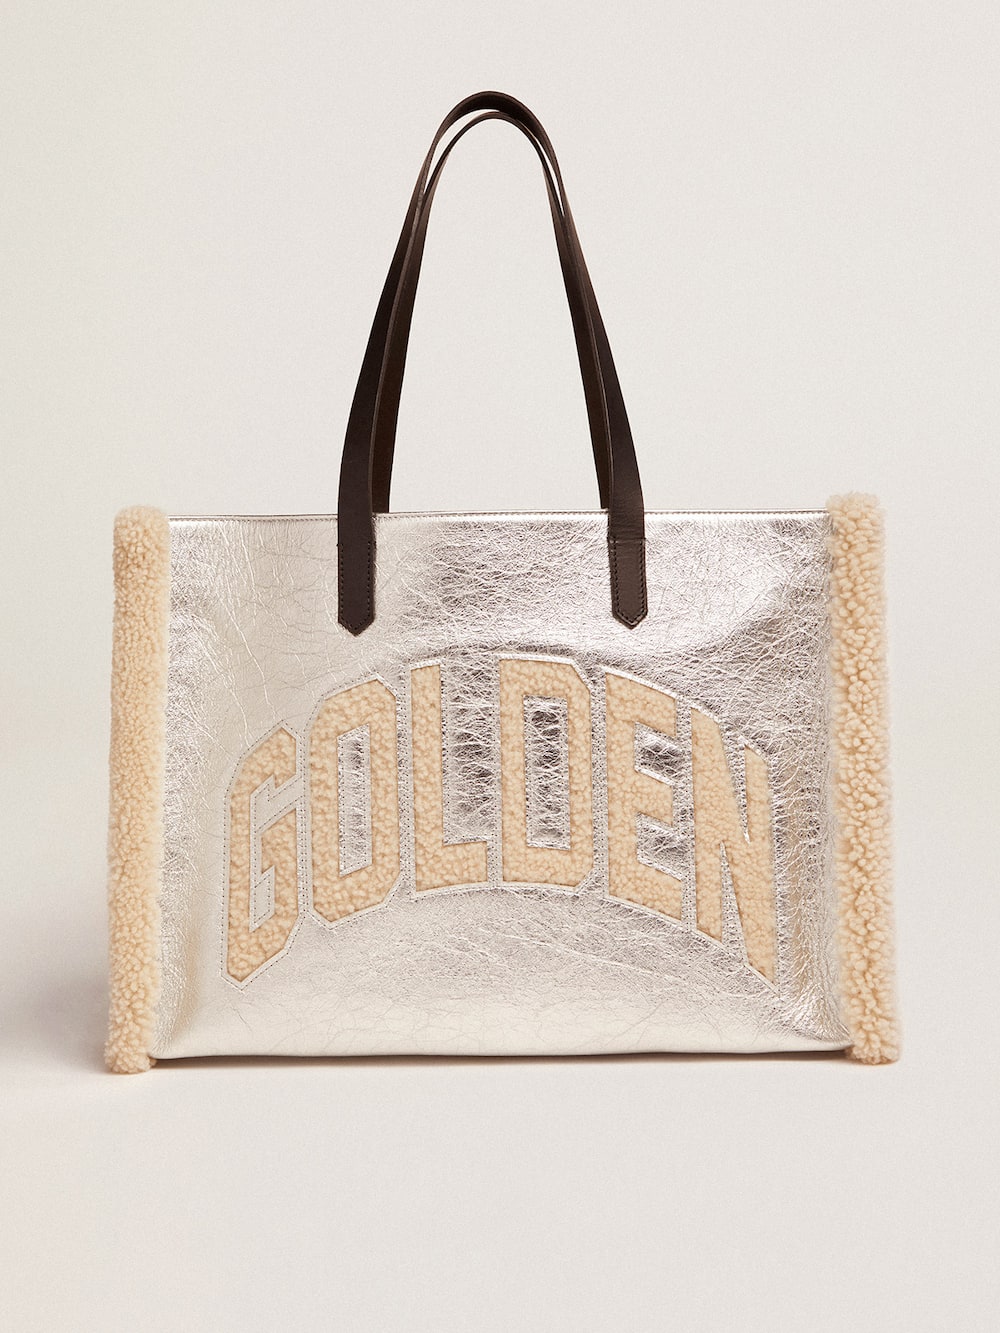 Golden Goose - Women's California Bag East-West in silver leather and wool inserts in 